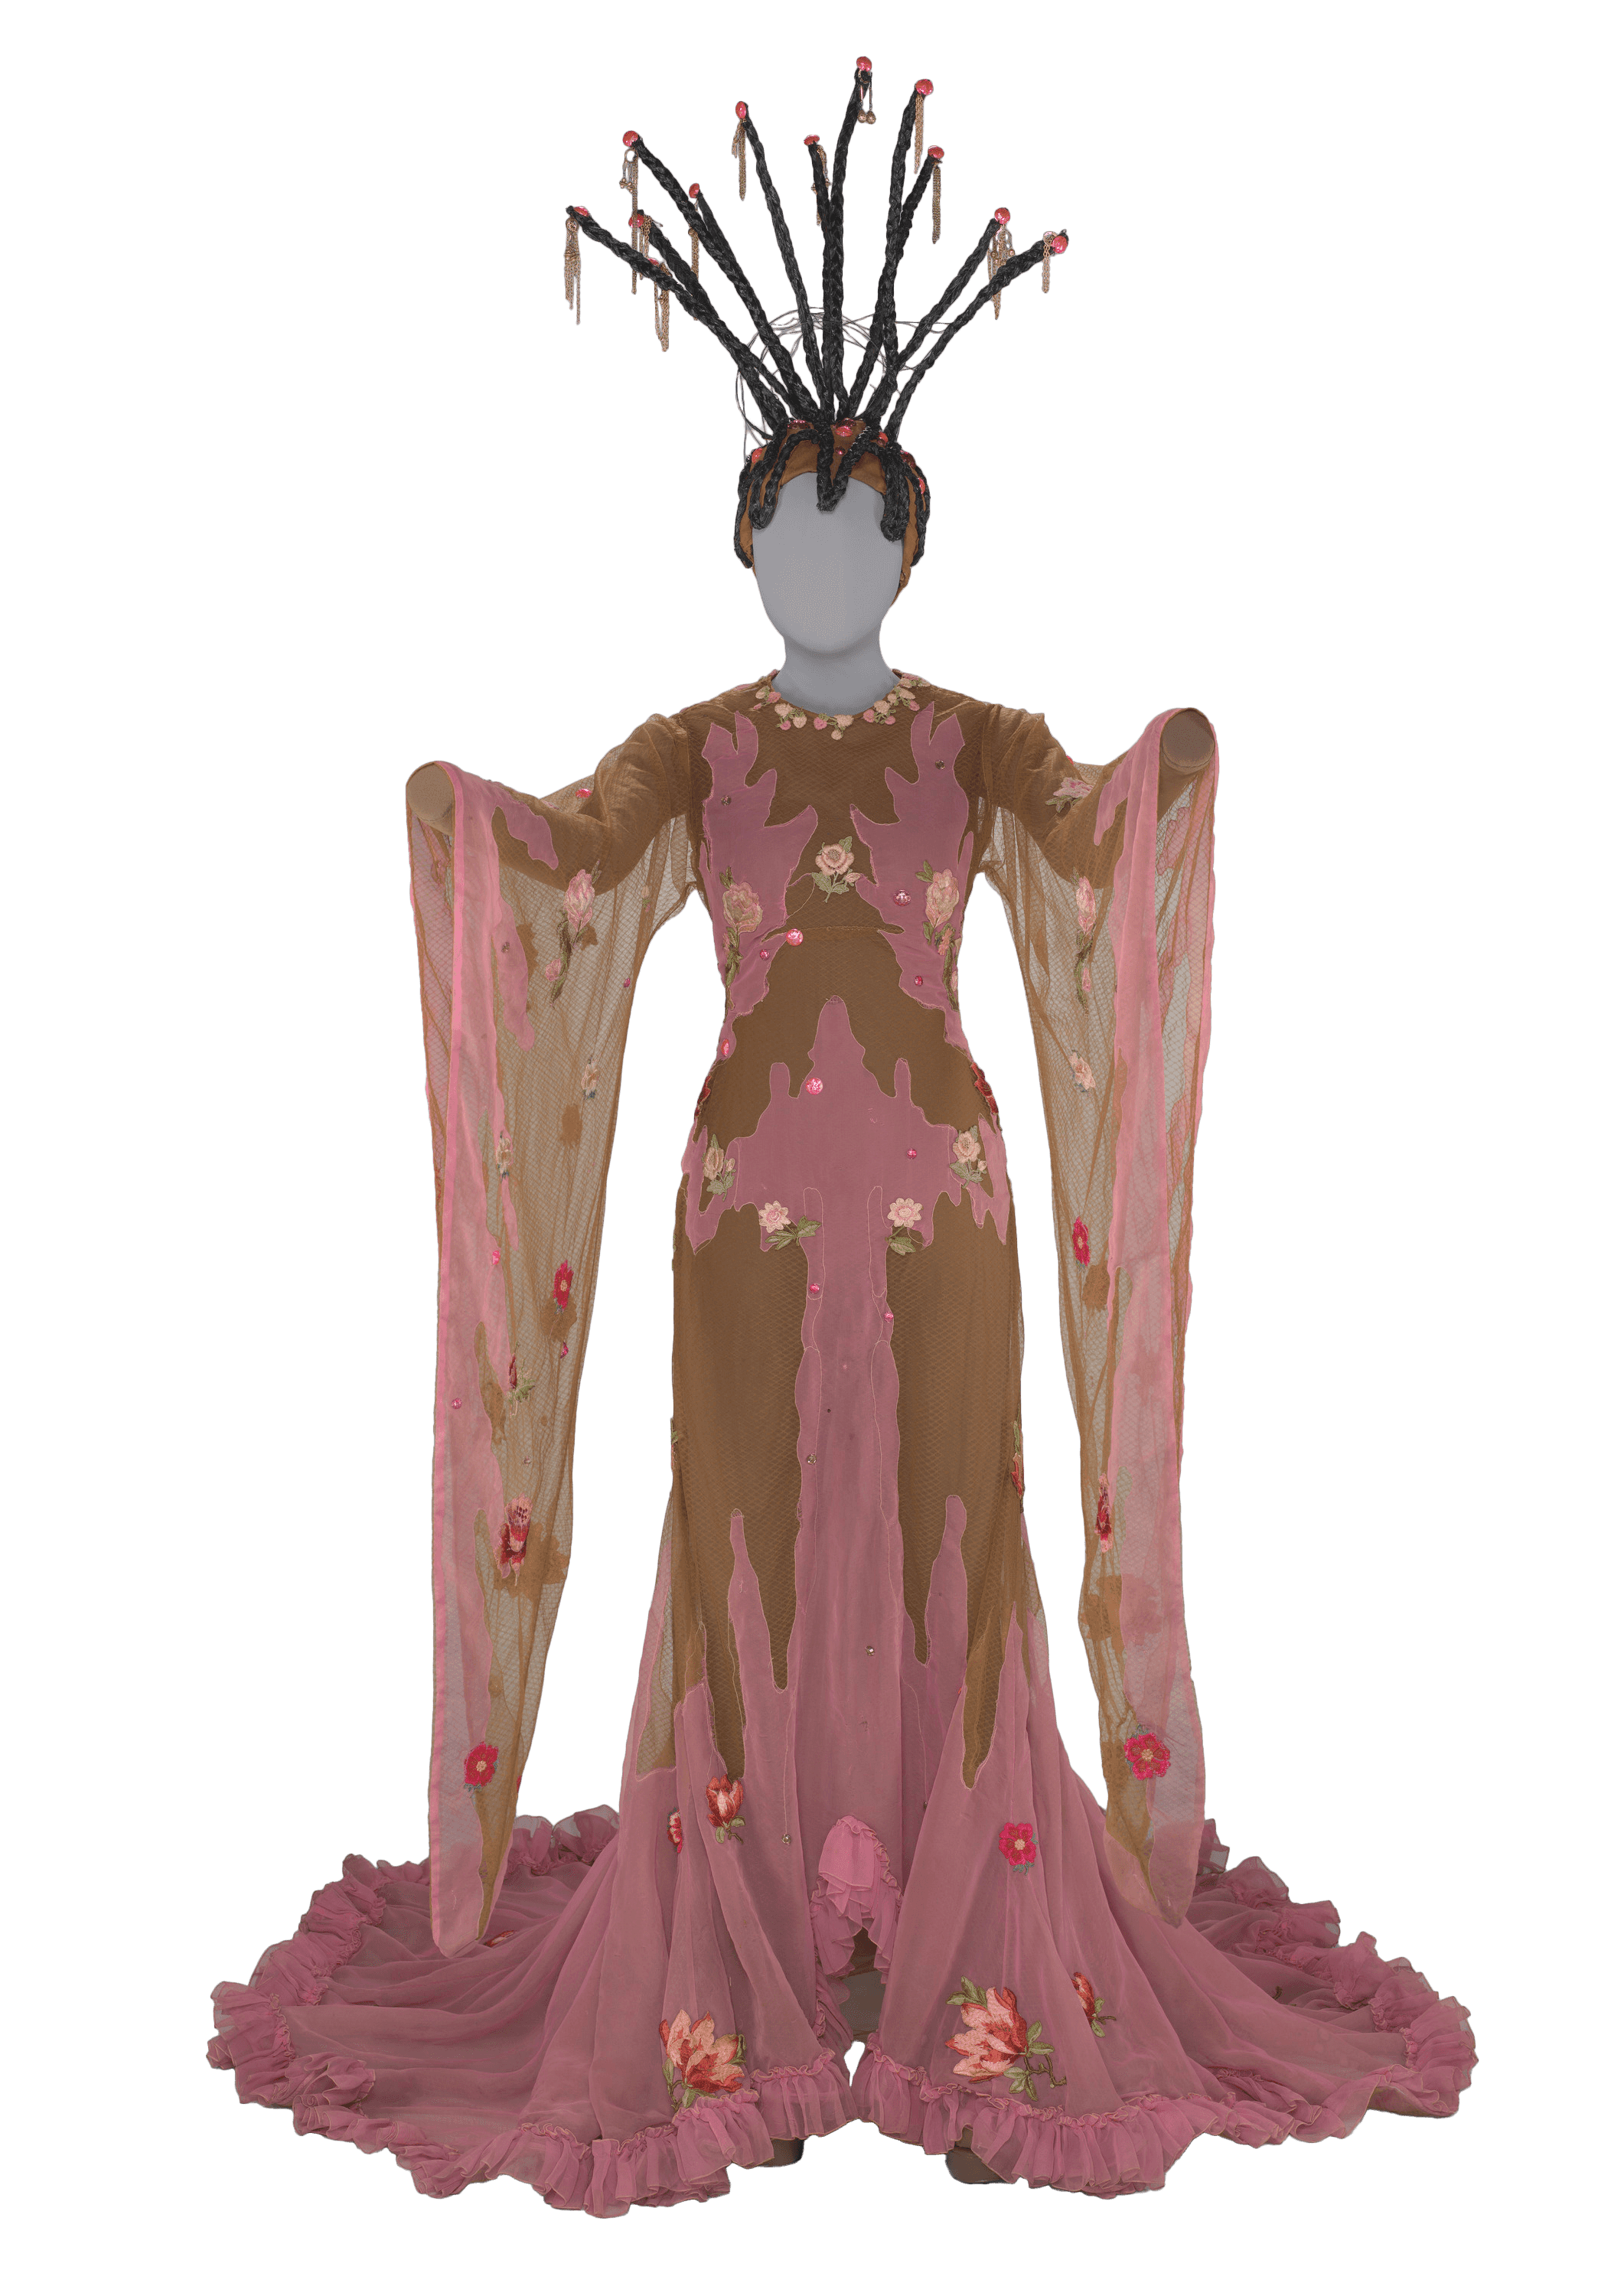 A pink and tan floor lengthn costume gown and natural hair like head covering for Glinda the Good Witch in The Wiz.